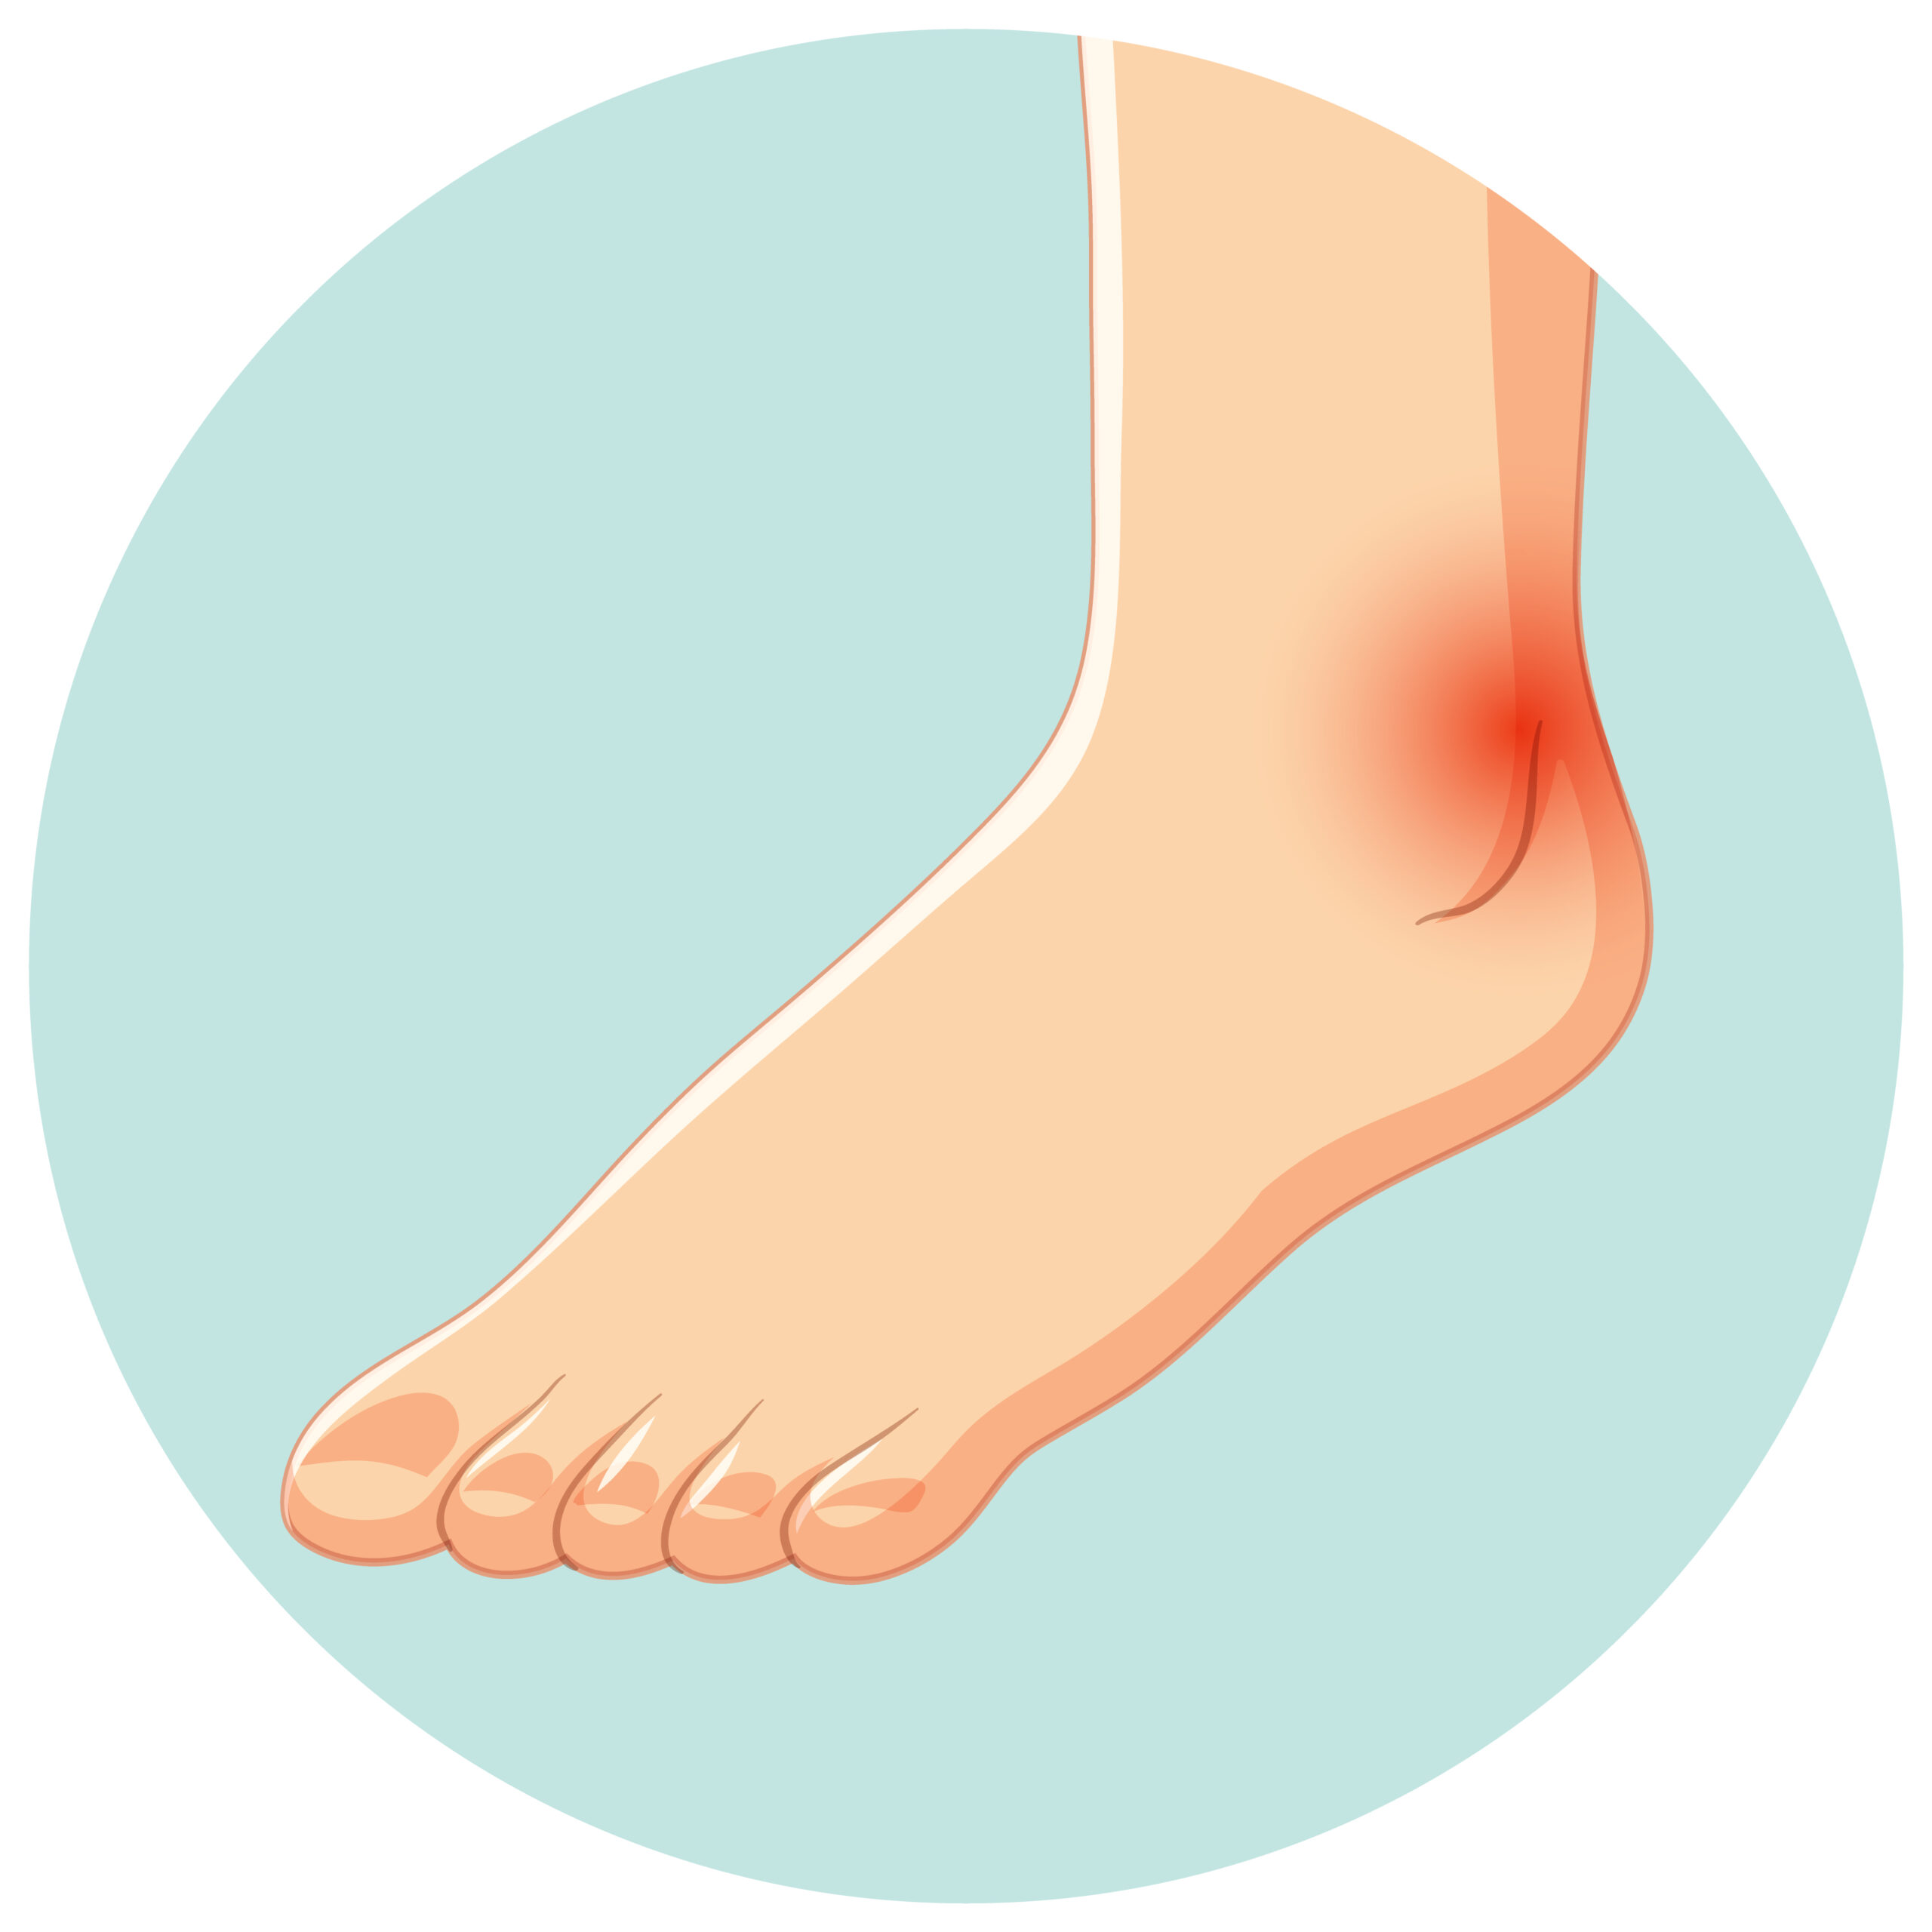 Causes of Foot Pain